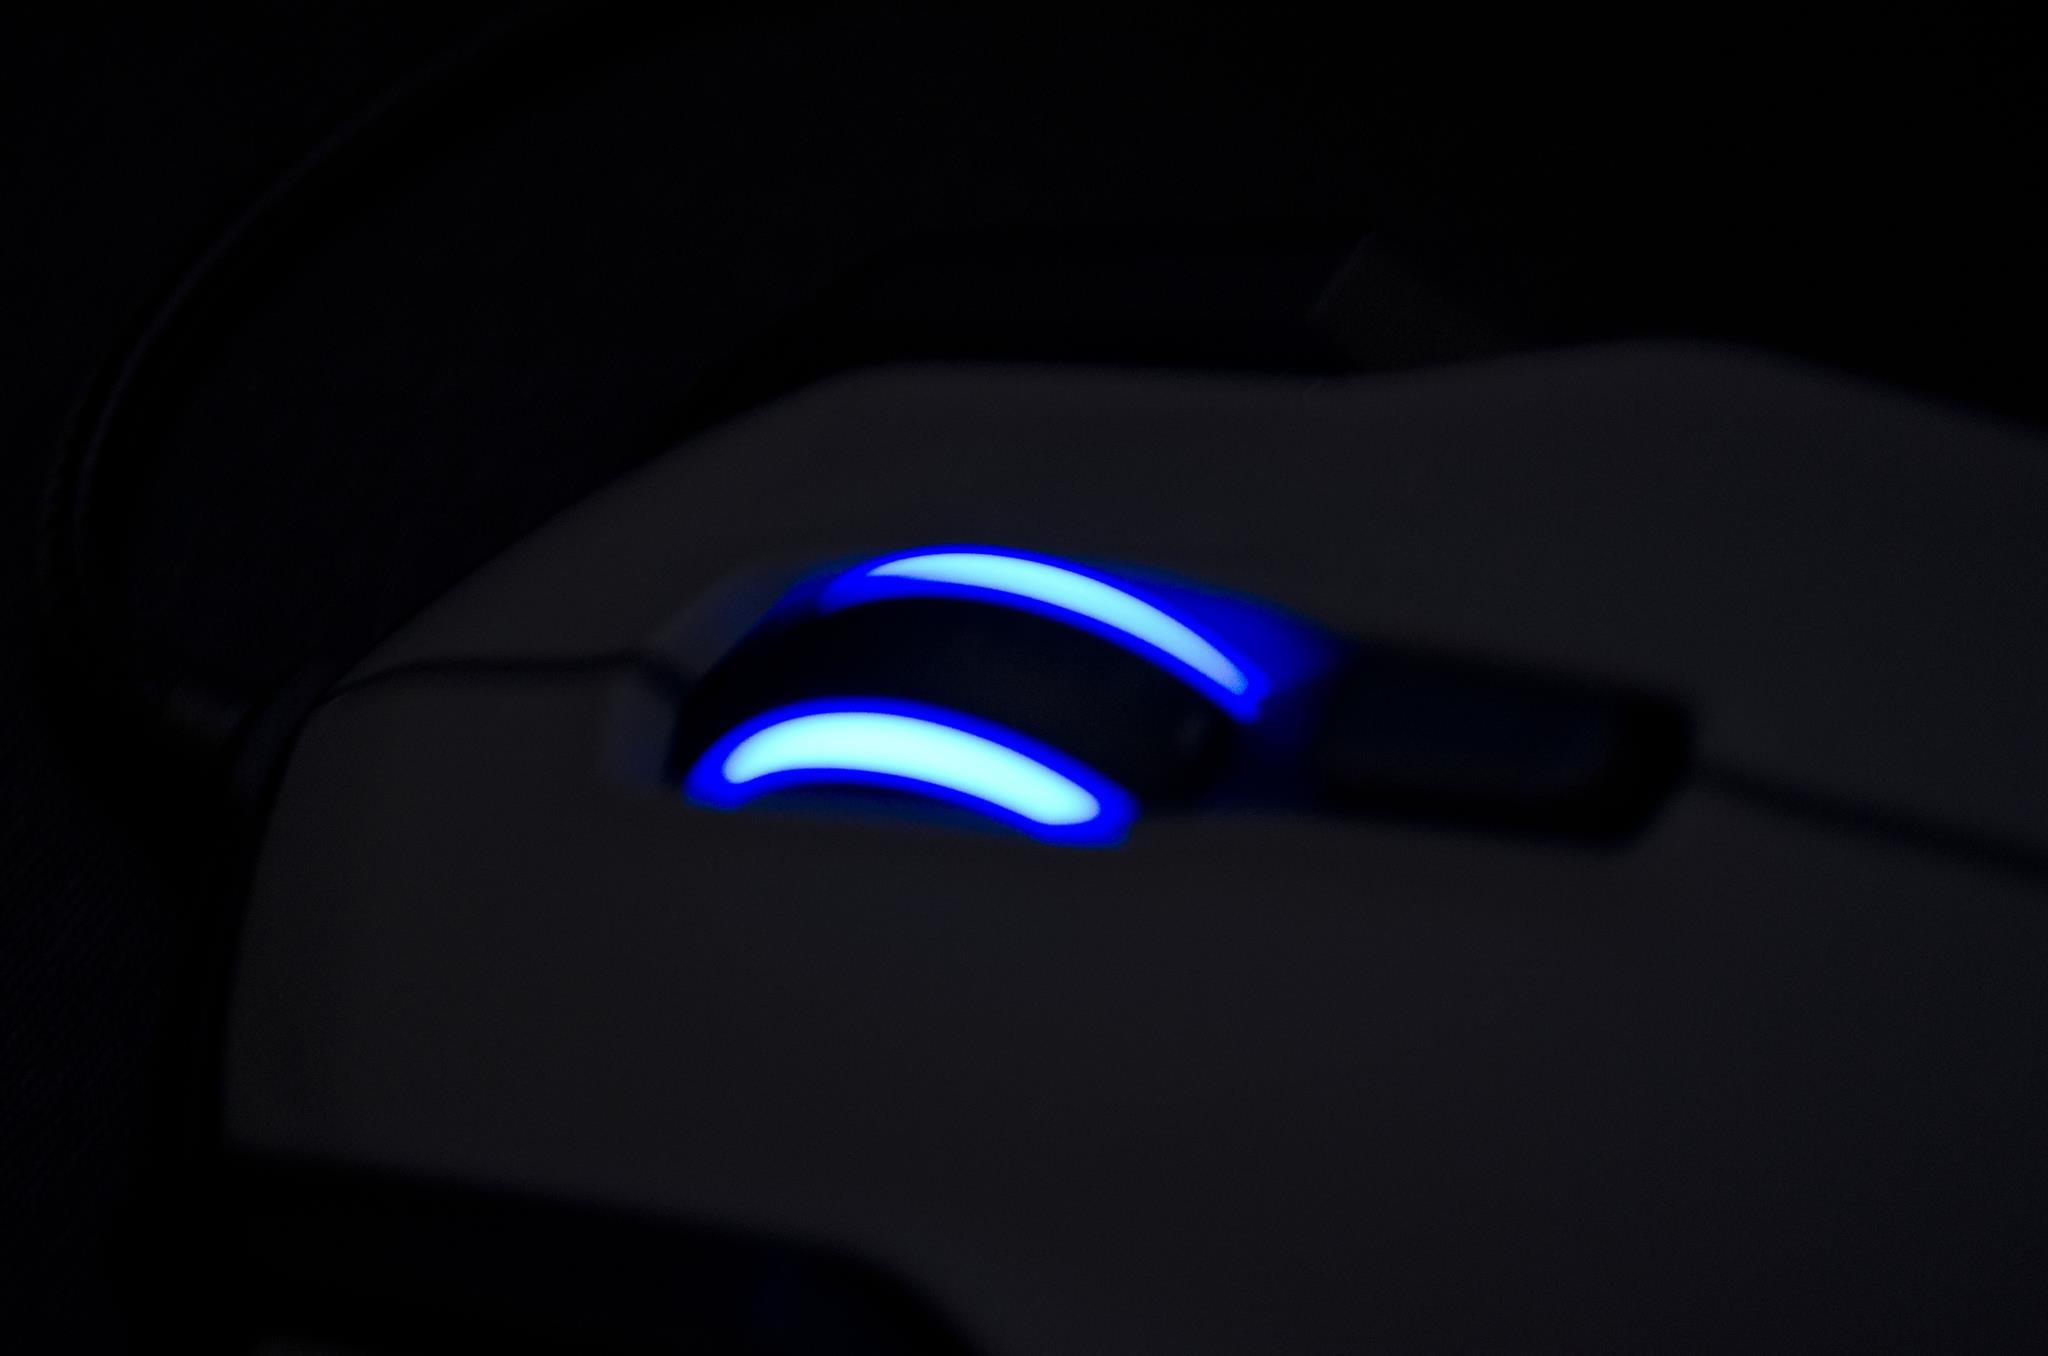 roccat kova gaming mouse review